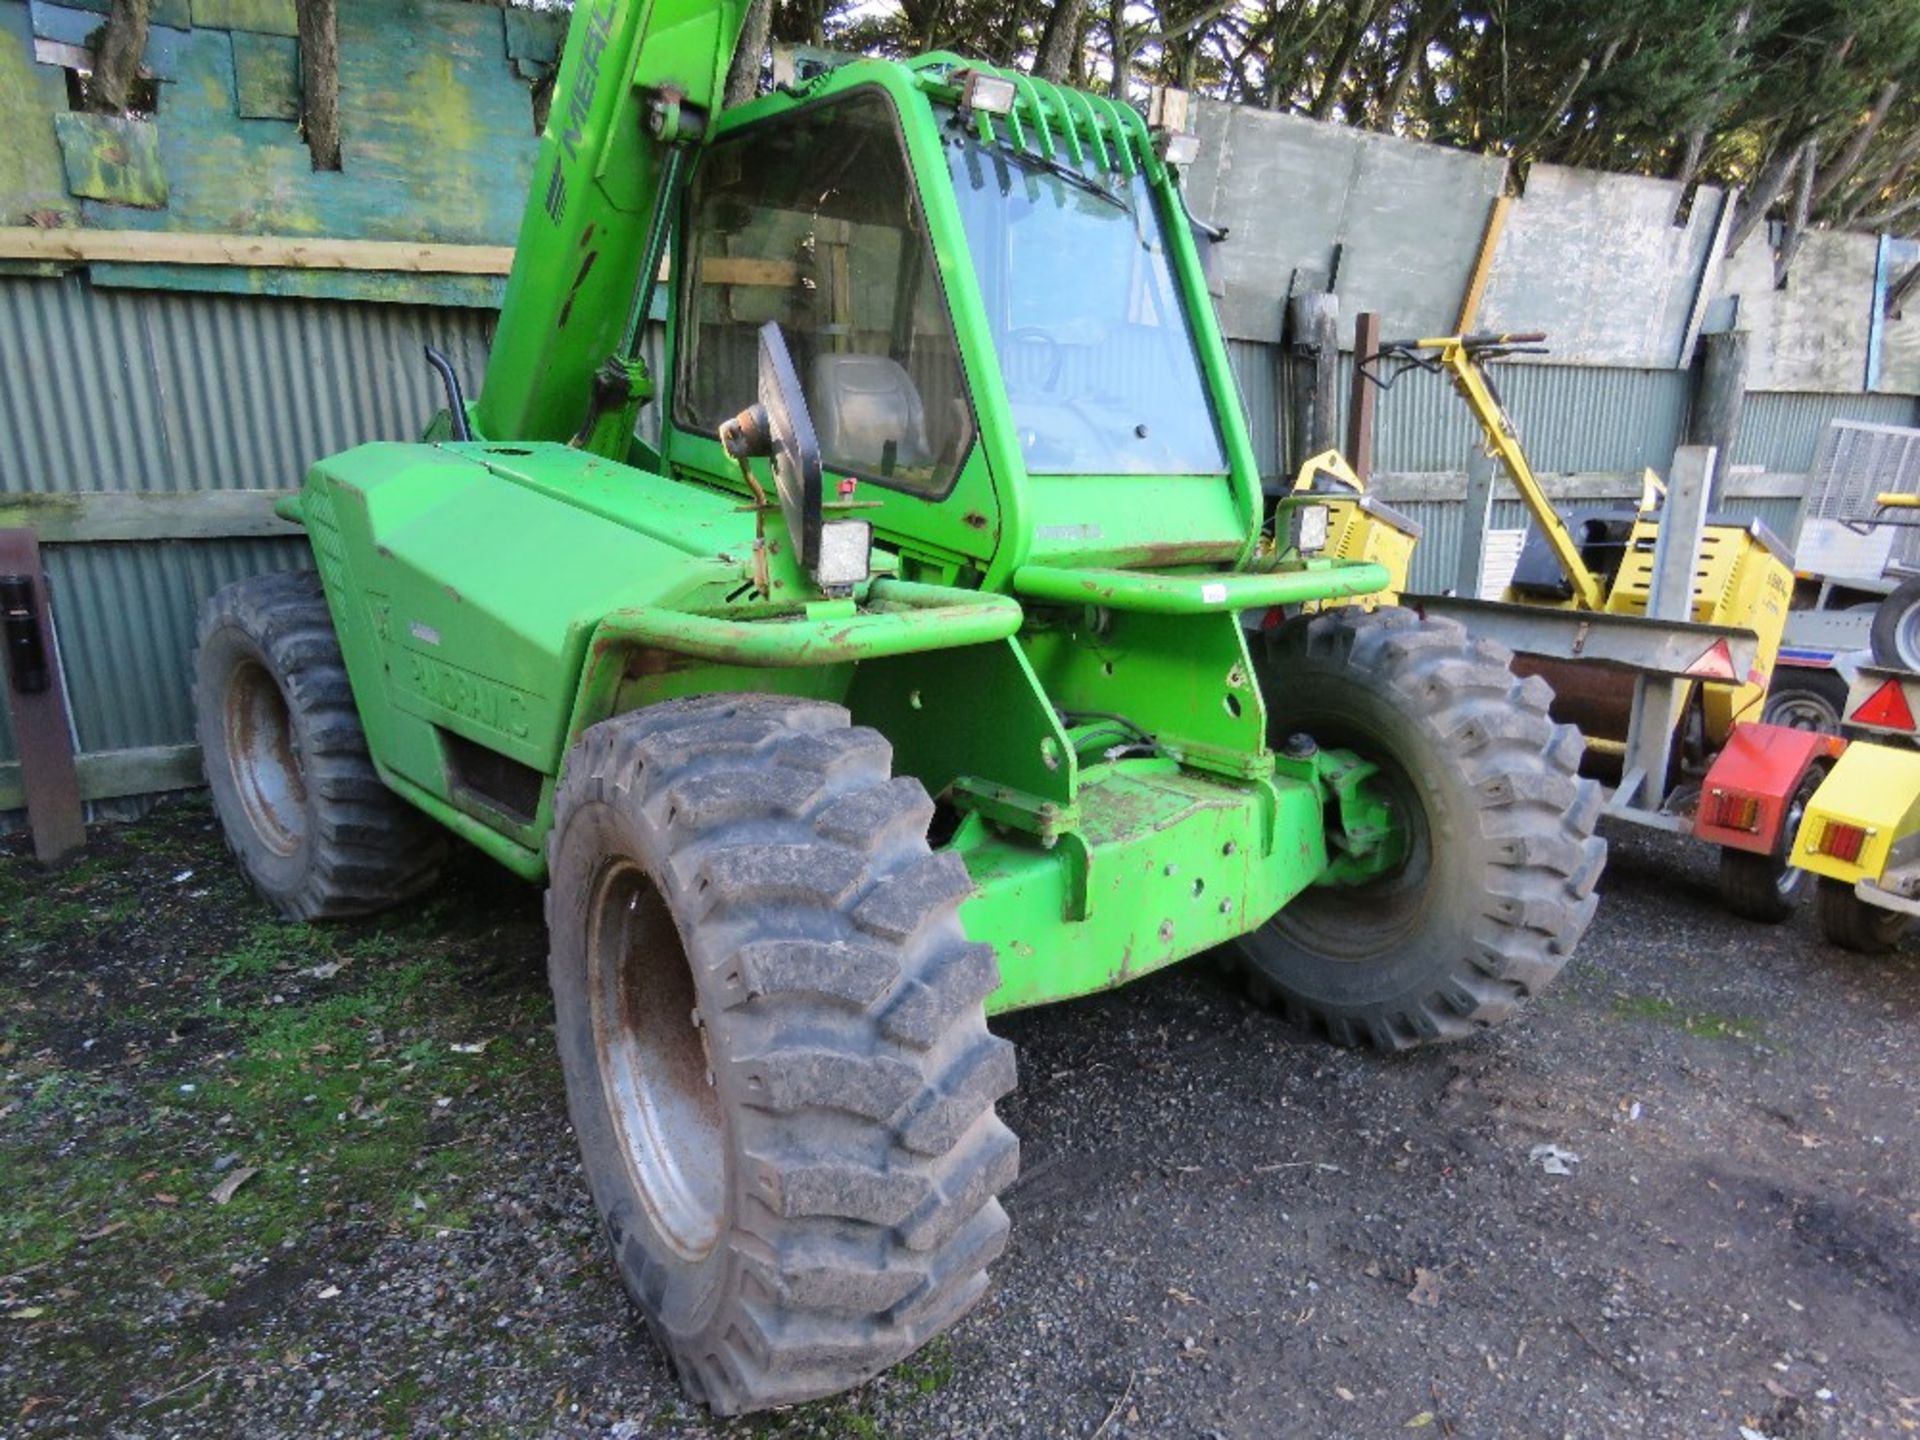 MERLO P27.7EVS TELEHANDLER. 6326 RECORDED HOURS. PERKINS ENGINE. SN: 4111137 DIRECT FROM LOCAL COMPA - Image 2 of 11